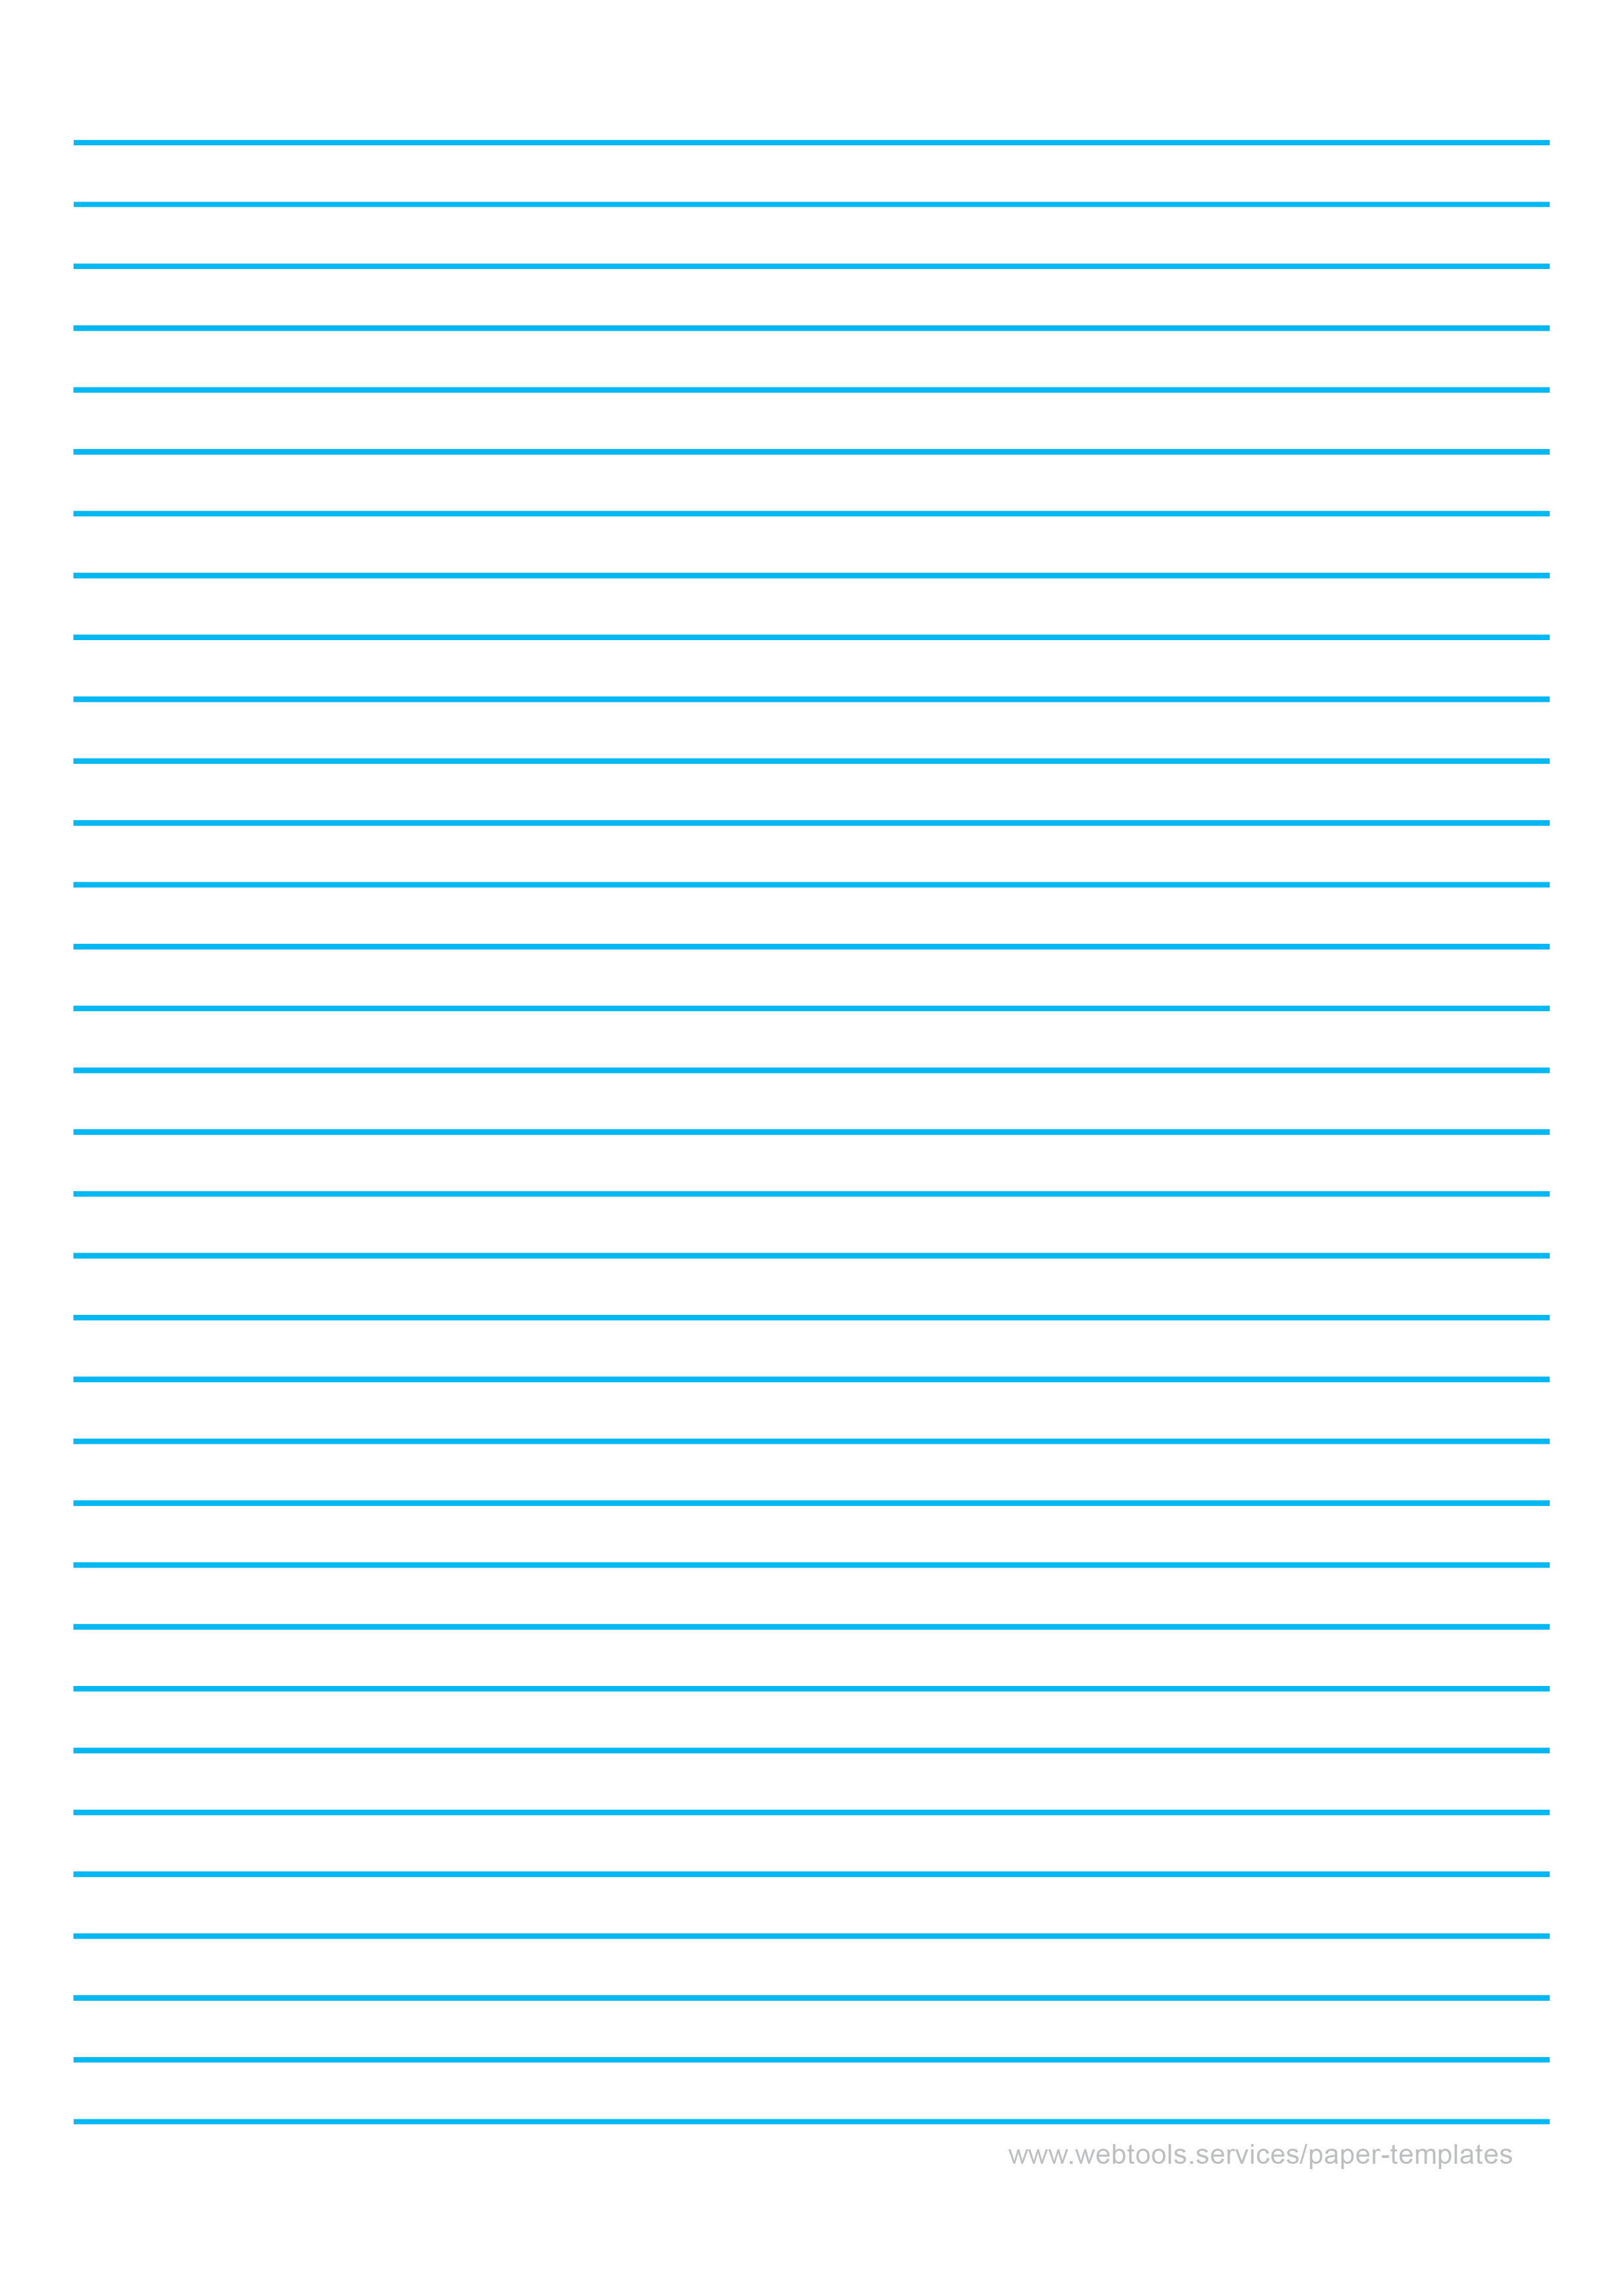 Printable Hindi Notebook Page With Blue Lines